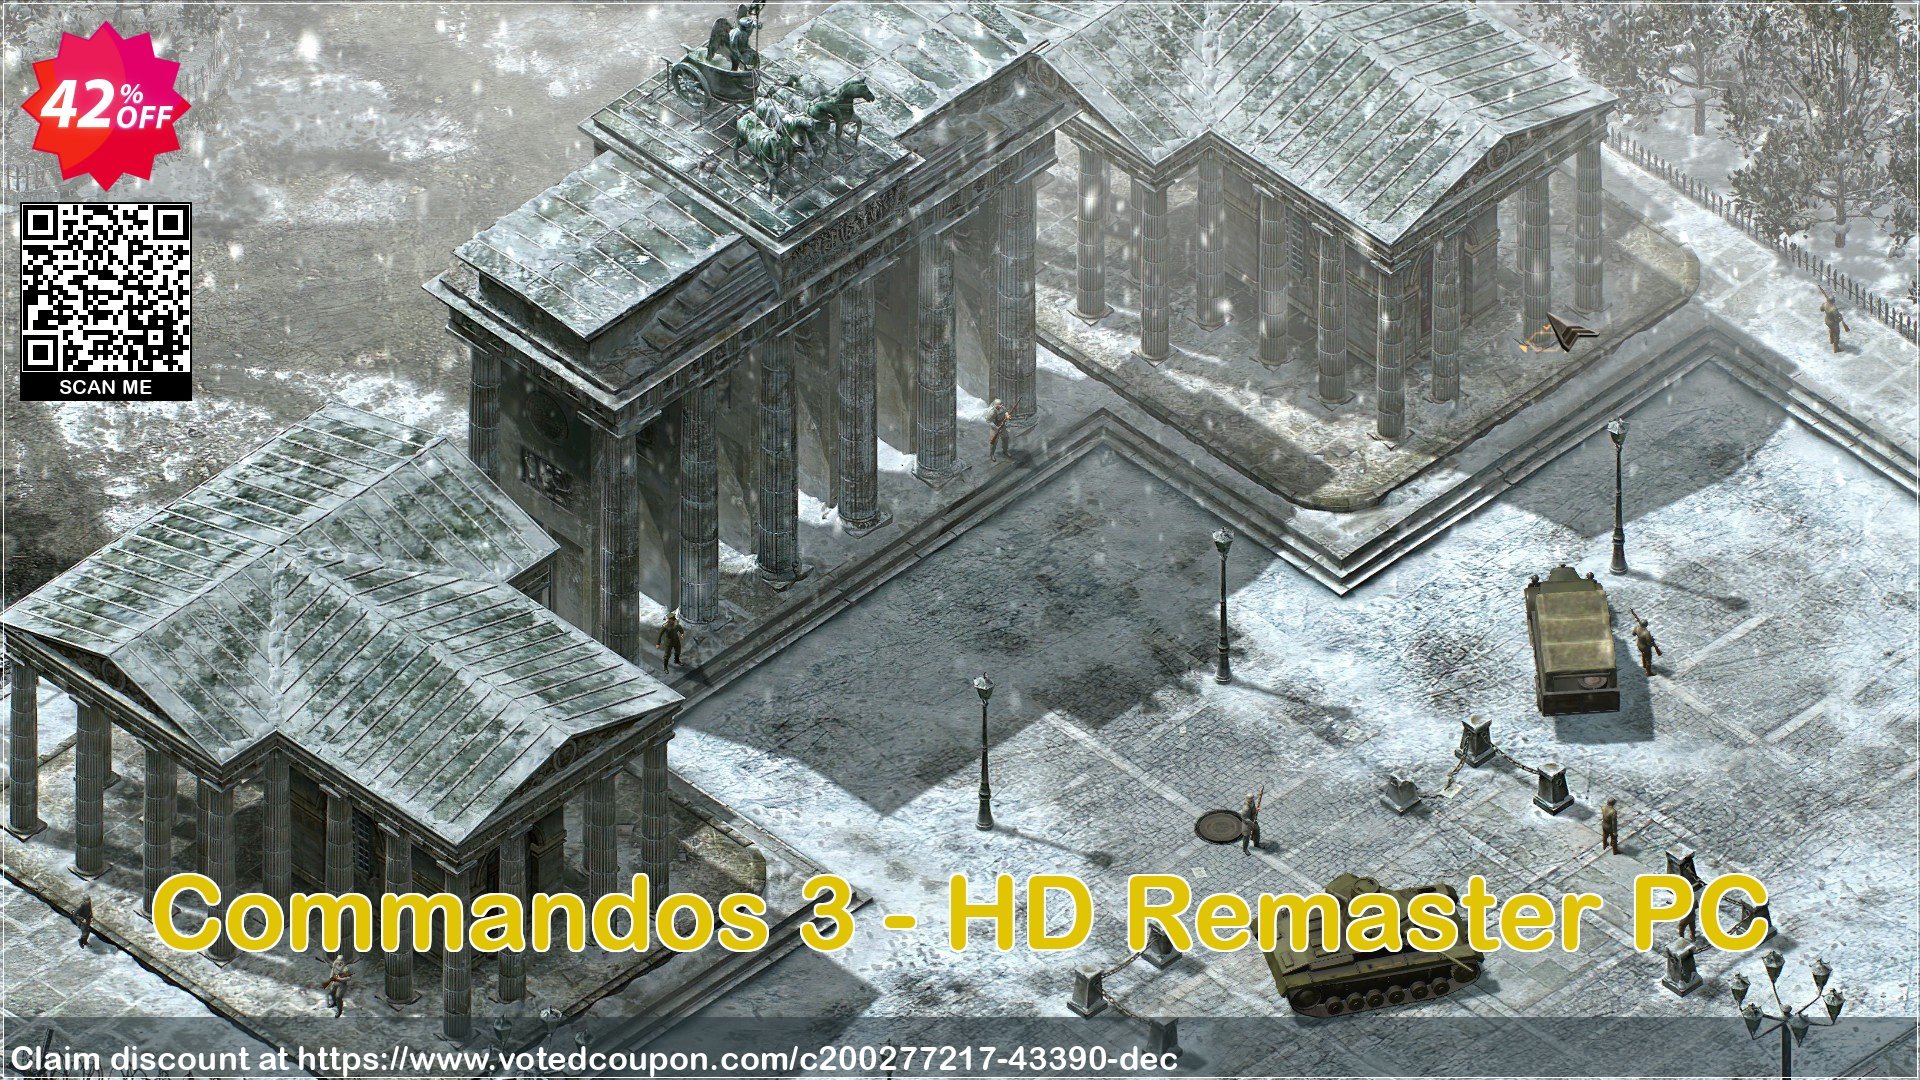 Commandos 3 - HD Remaster PC Coupon Code May 2024, 42% OFF - VotedCoupon